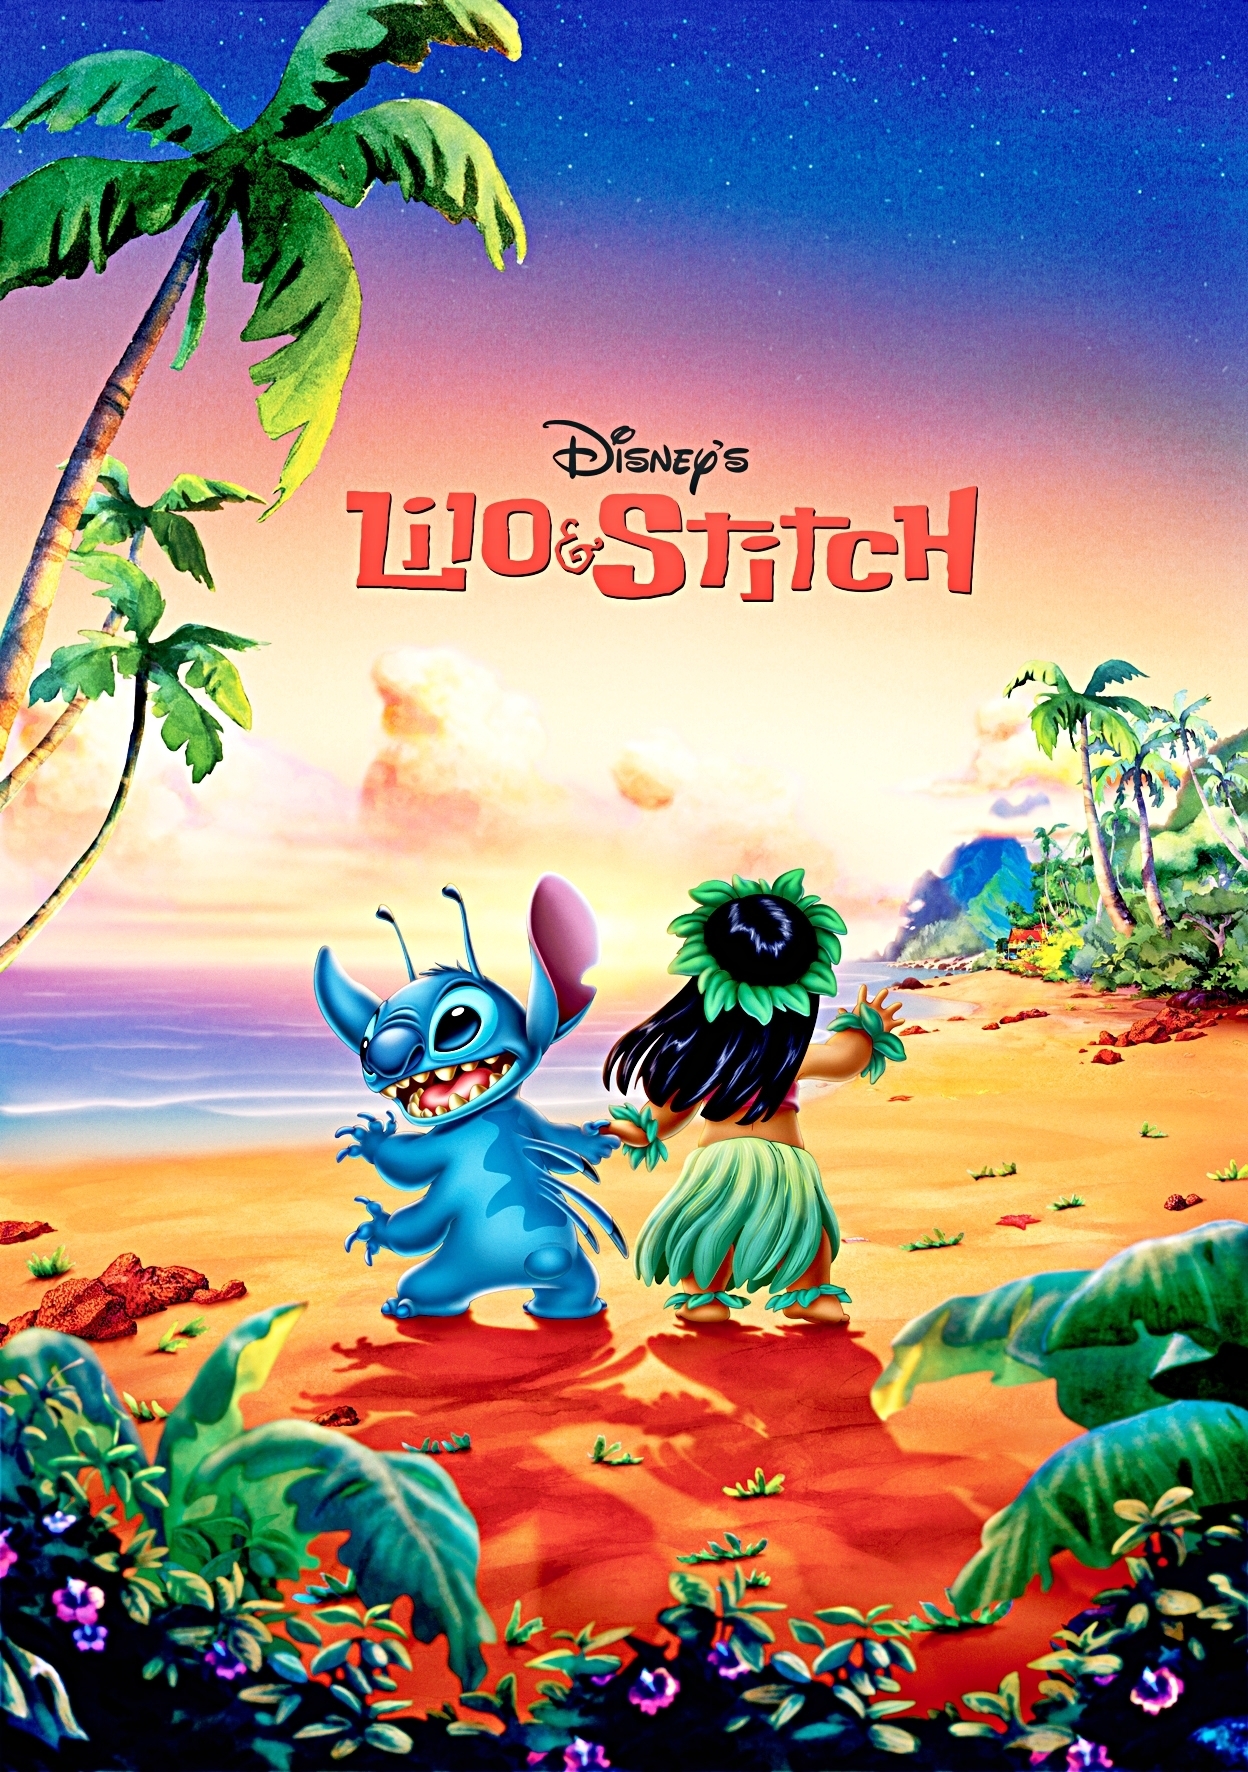 Lilo & Stitch - Framed TV Show / Movie Poster (Wave Surfing) (Size